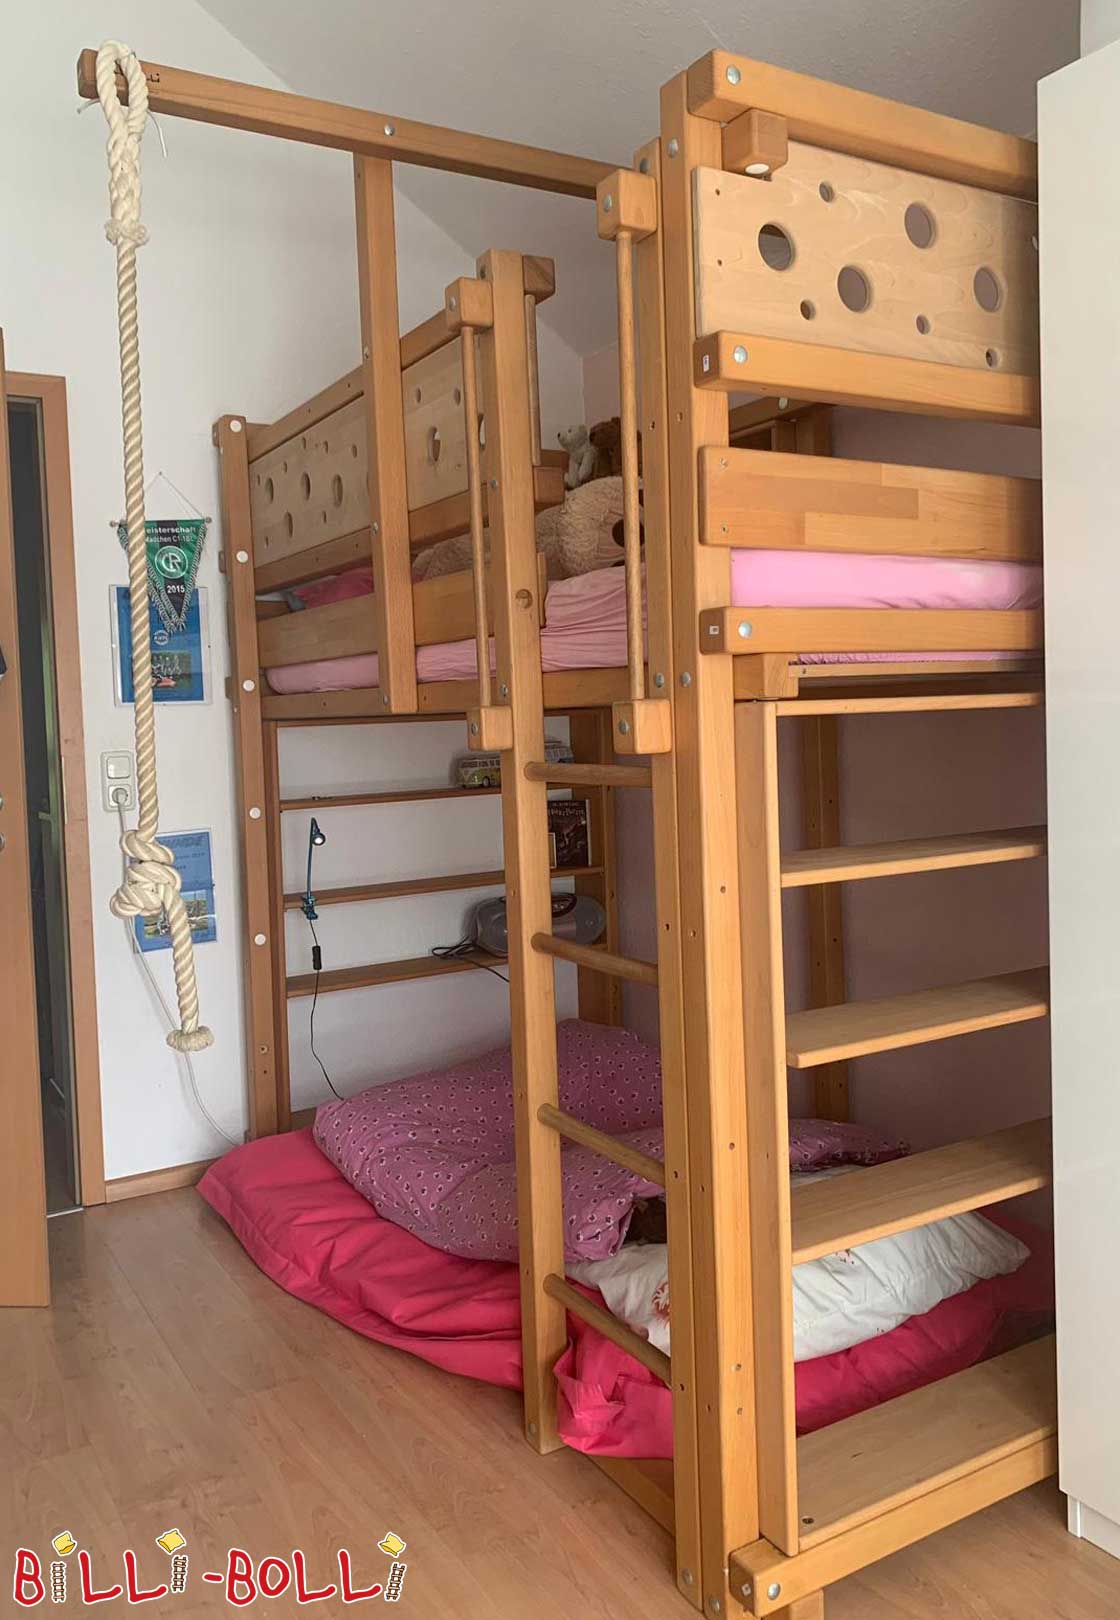 Loft bed that grows with the child incl. conversion sets in Oberhausen (Category: second hand loft bed)